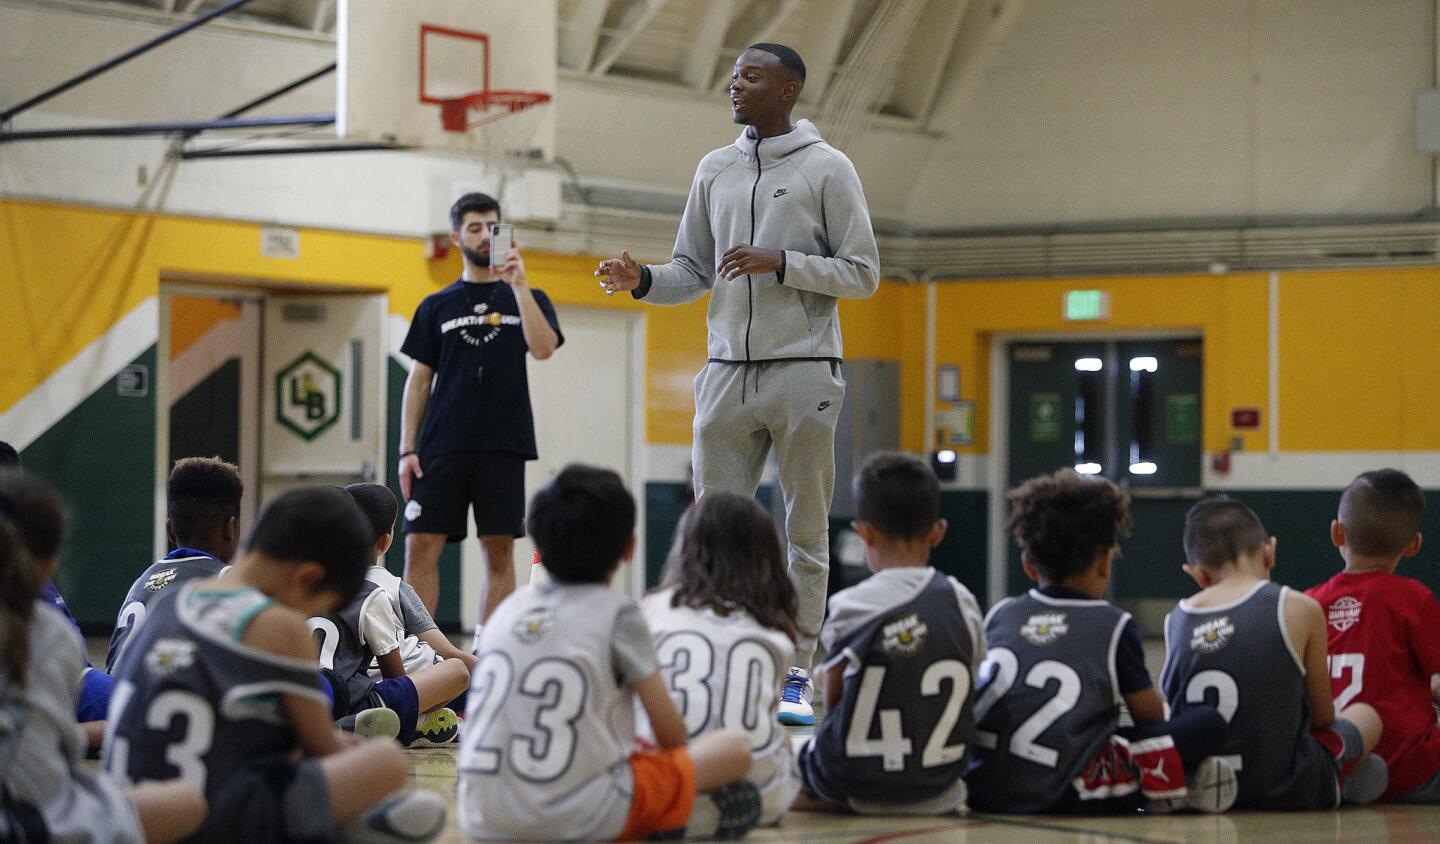 Austin Pope, formerly of Burbank High and currently working out with NBA teams with the goal of being an NBA player himself, stands at 6' 5" and towers over the seated basketball campers in the Breakthrough Sports Basketball Camp at Luther Burbank Middle School in Burbank on Thursday, June 13, 2019. This is the first year of the camp, and Austin Pope is a special guest.